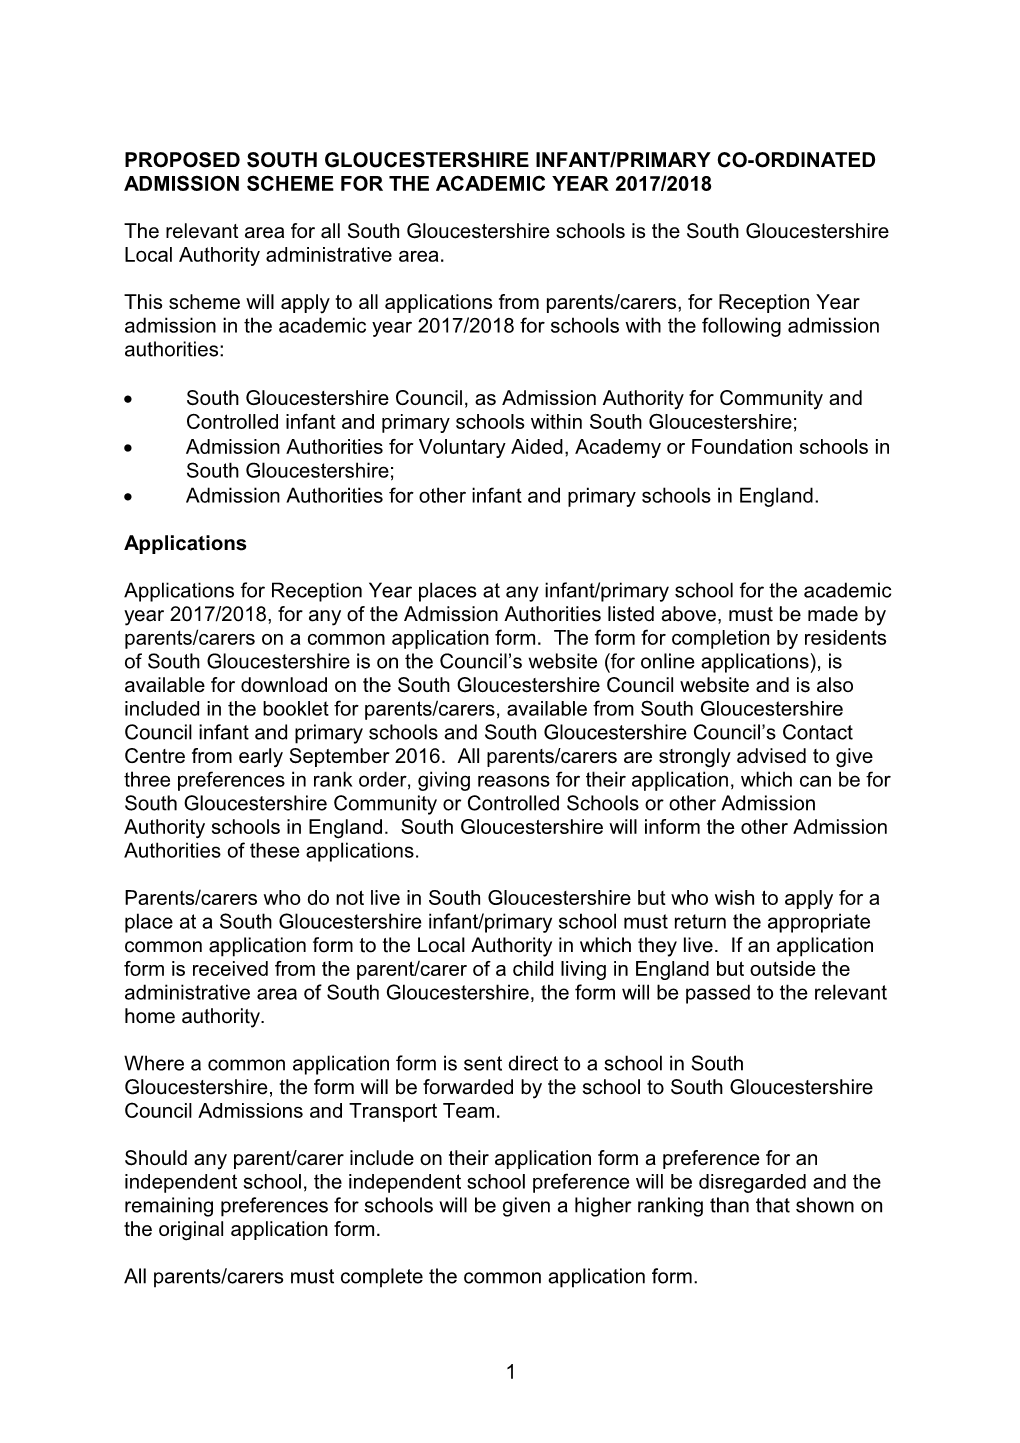 Proposed South Gloucestershire Infant/Primary Co-Ordinated Admission Scheme for the Academic